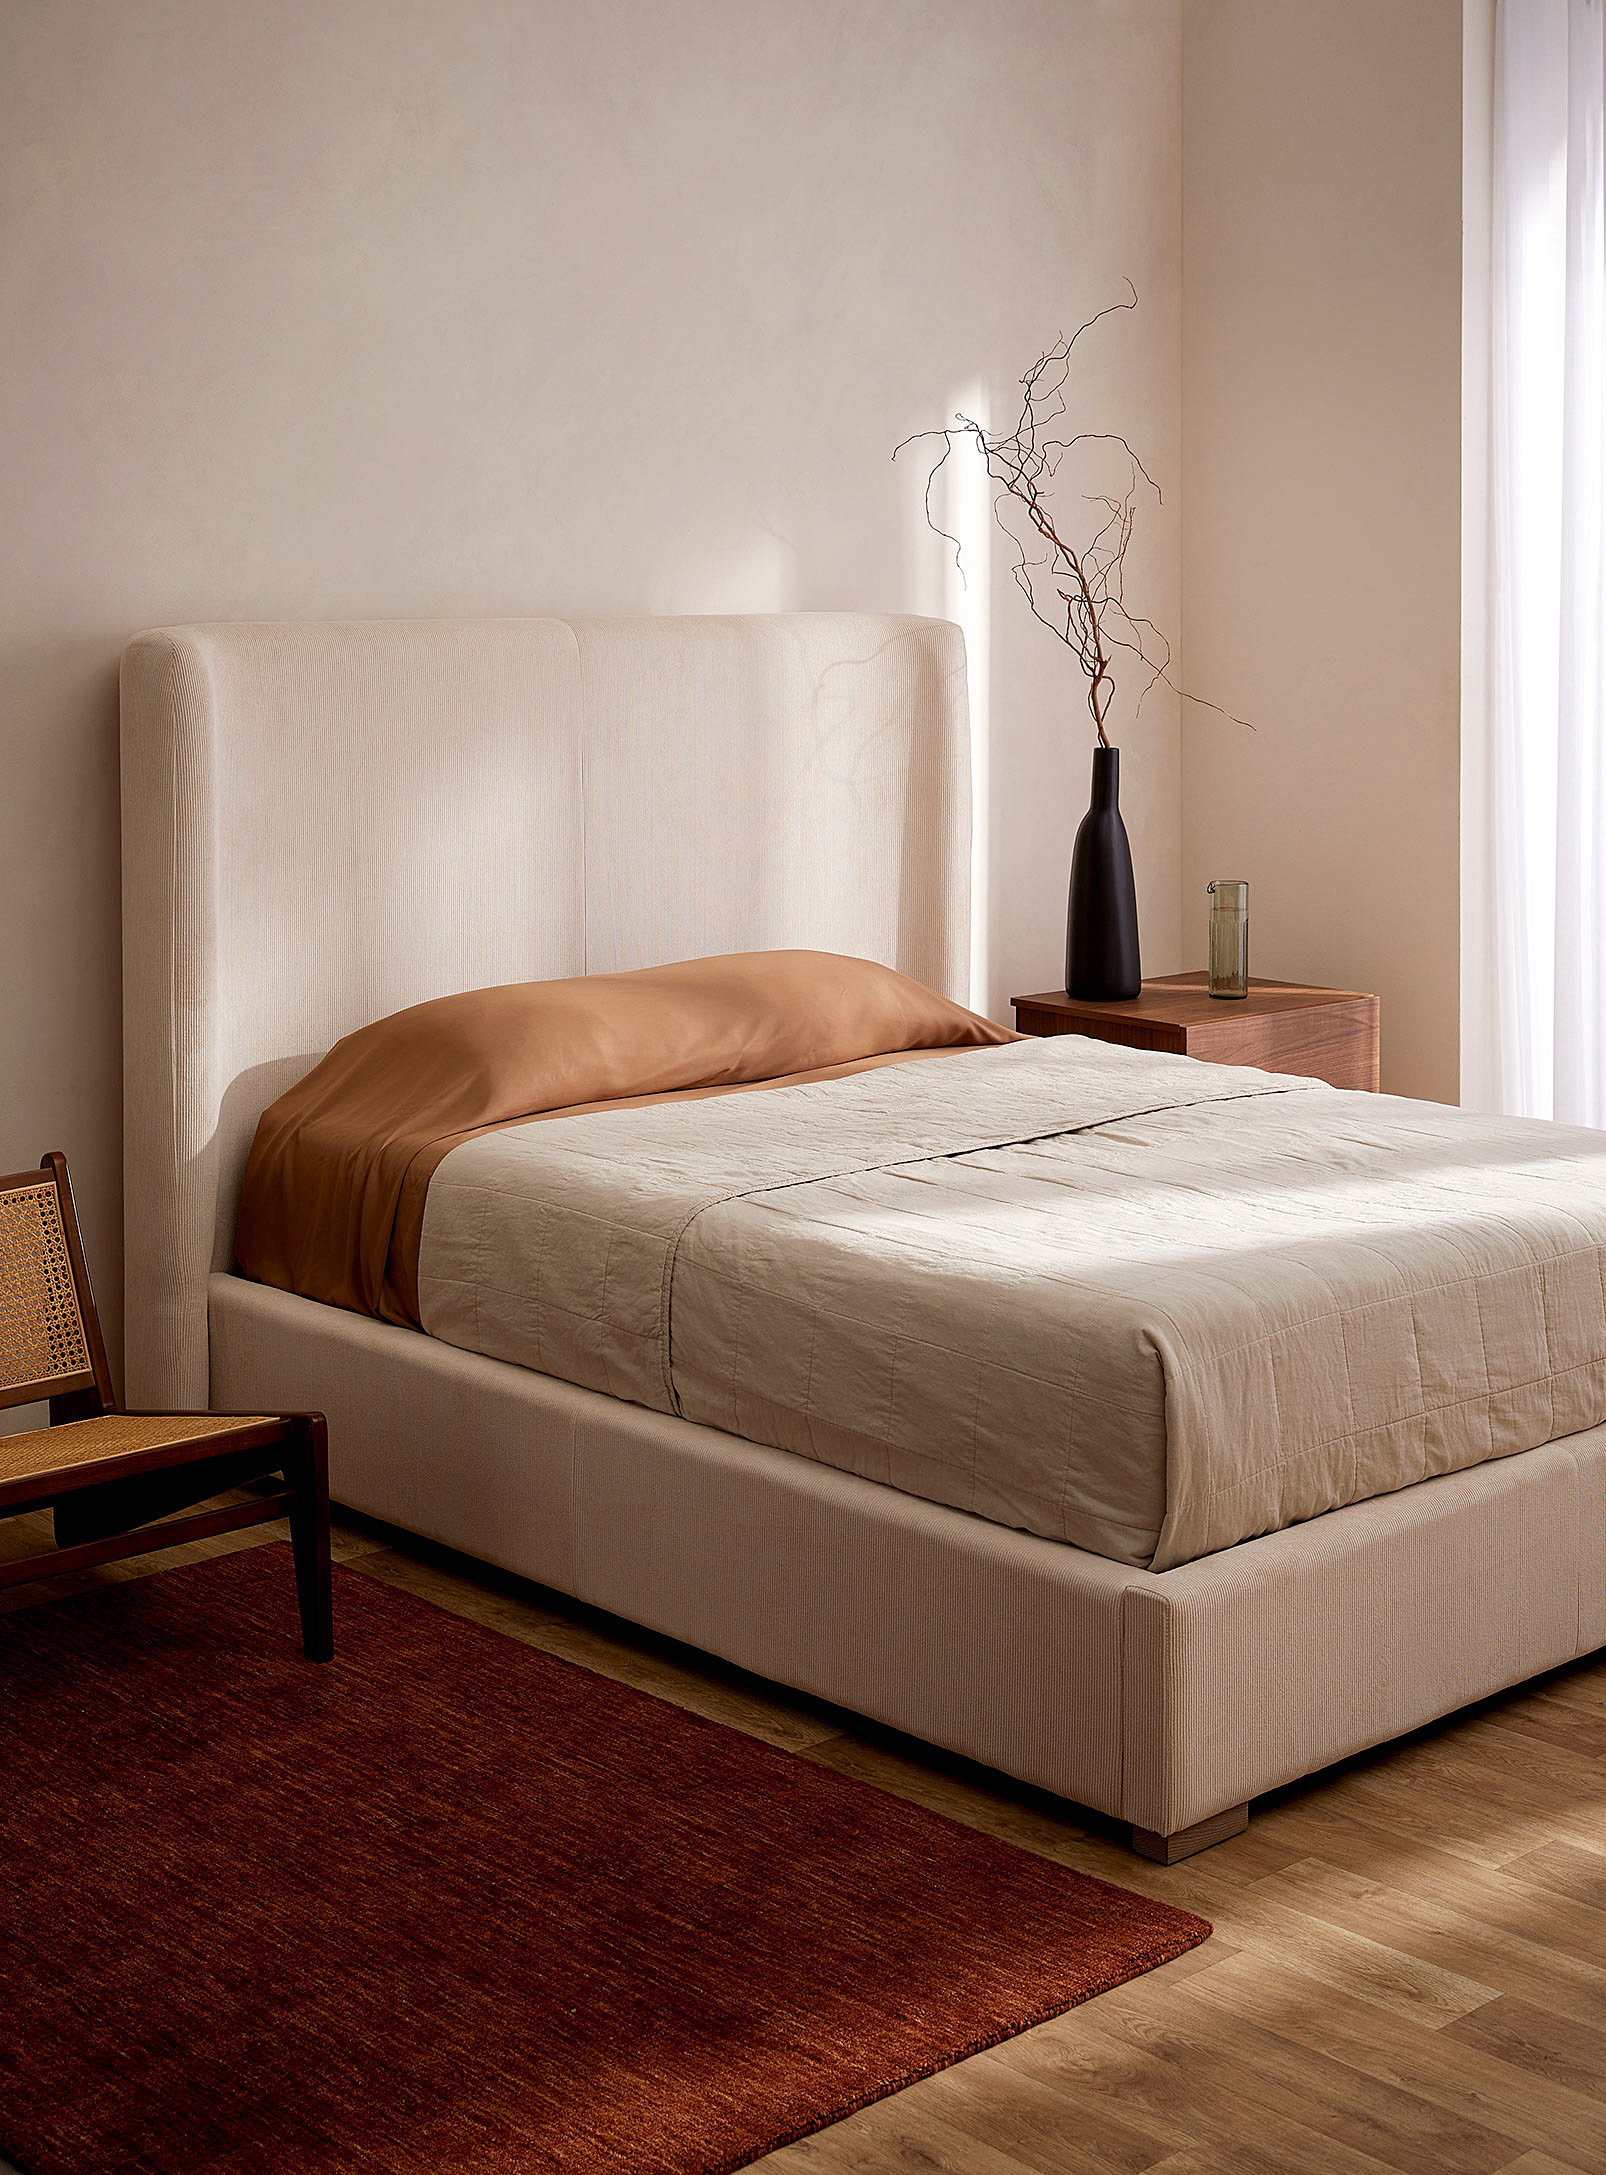 Simons Maison Cream Padded Bed Frame See Available Sizes In White